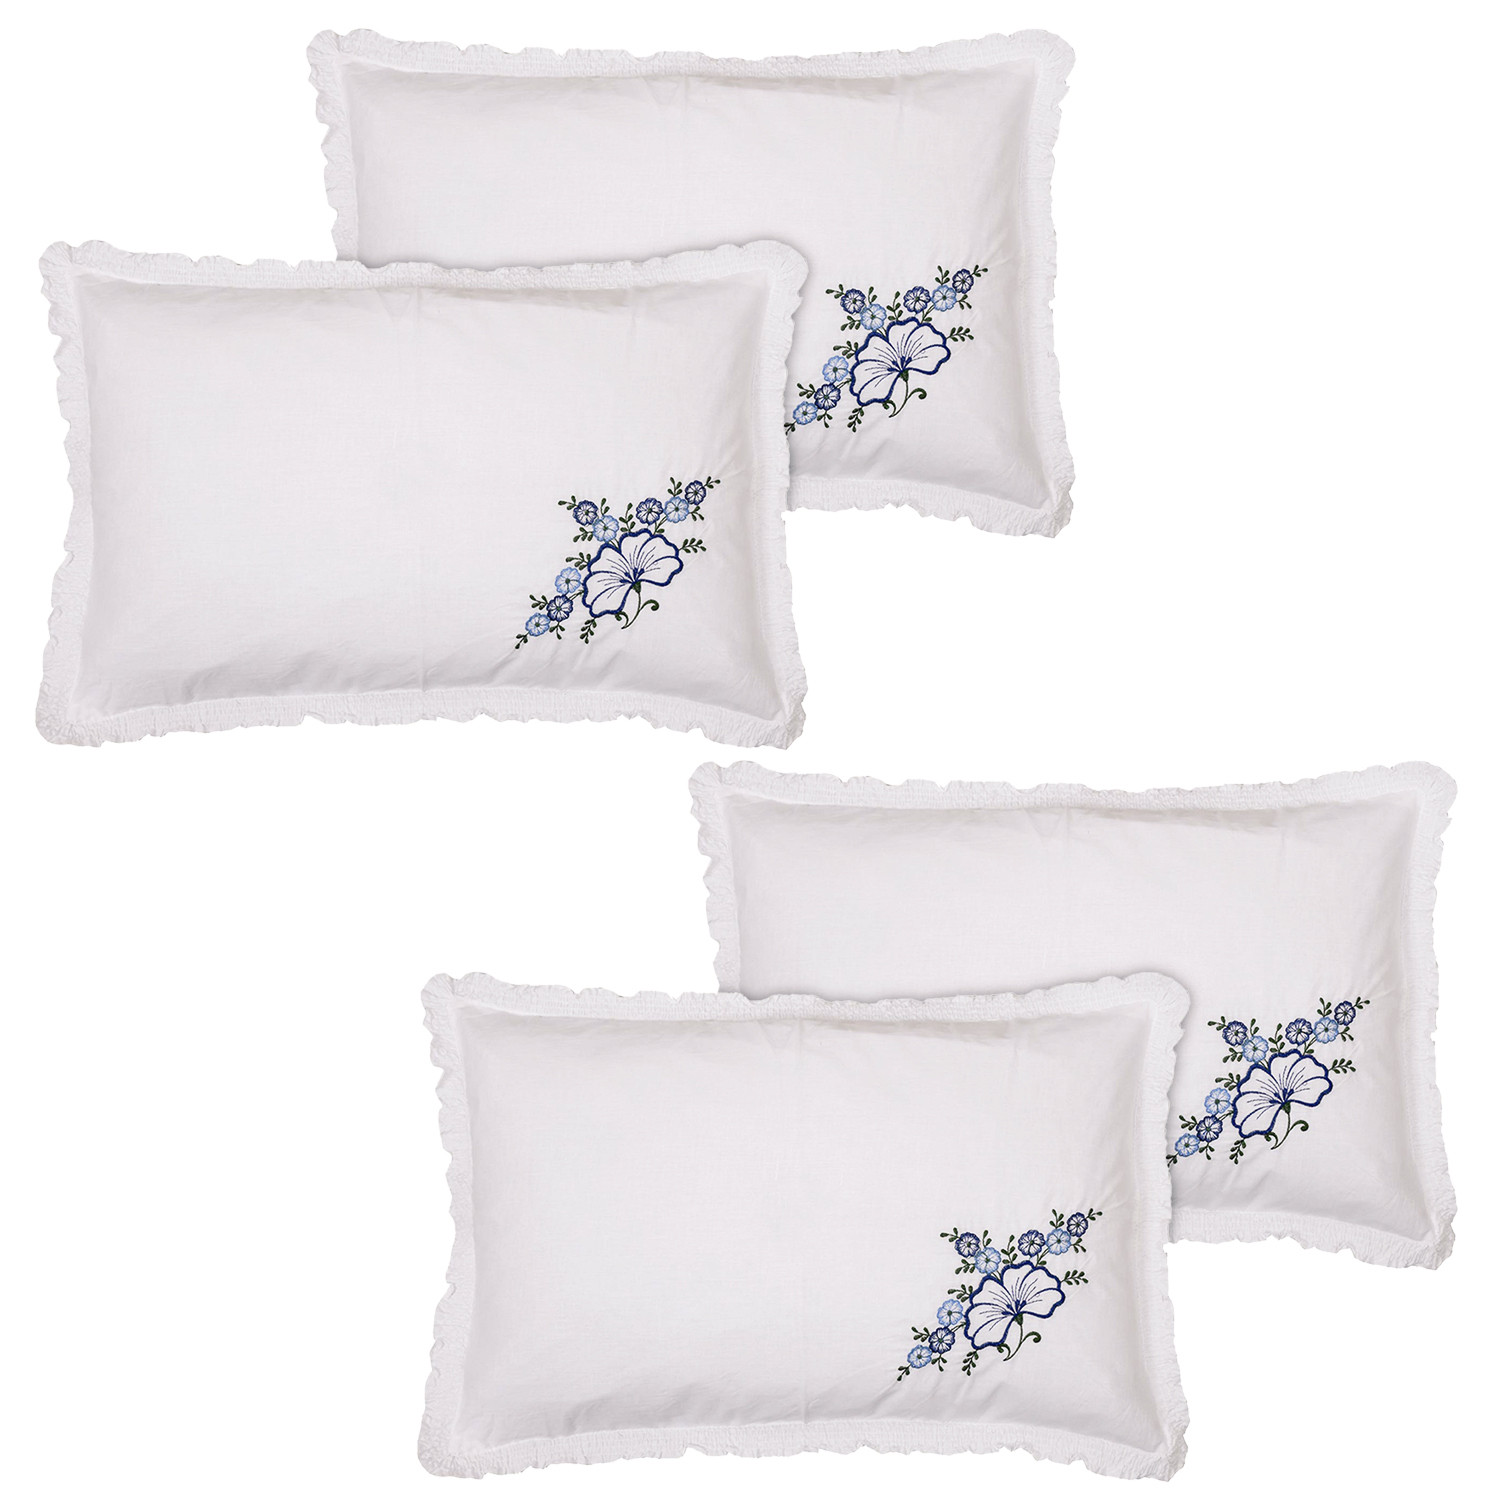 Kuber Industries Embroidery Pattern Breathable & Soft Cotton Pillow Cover For Sofa, Couch, Bed,(White) 54KM4113